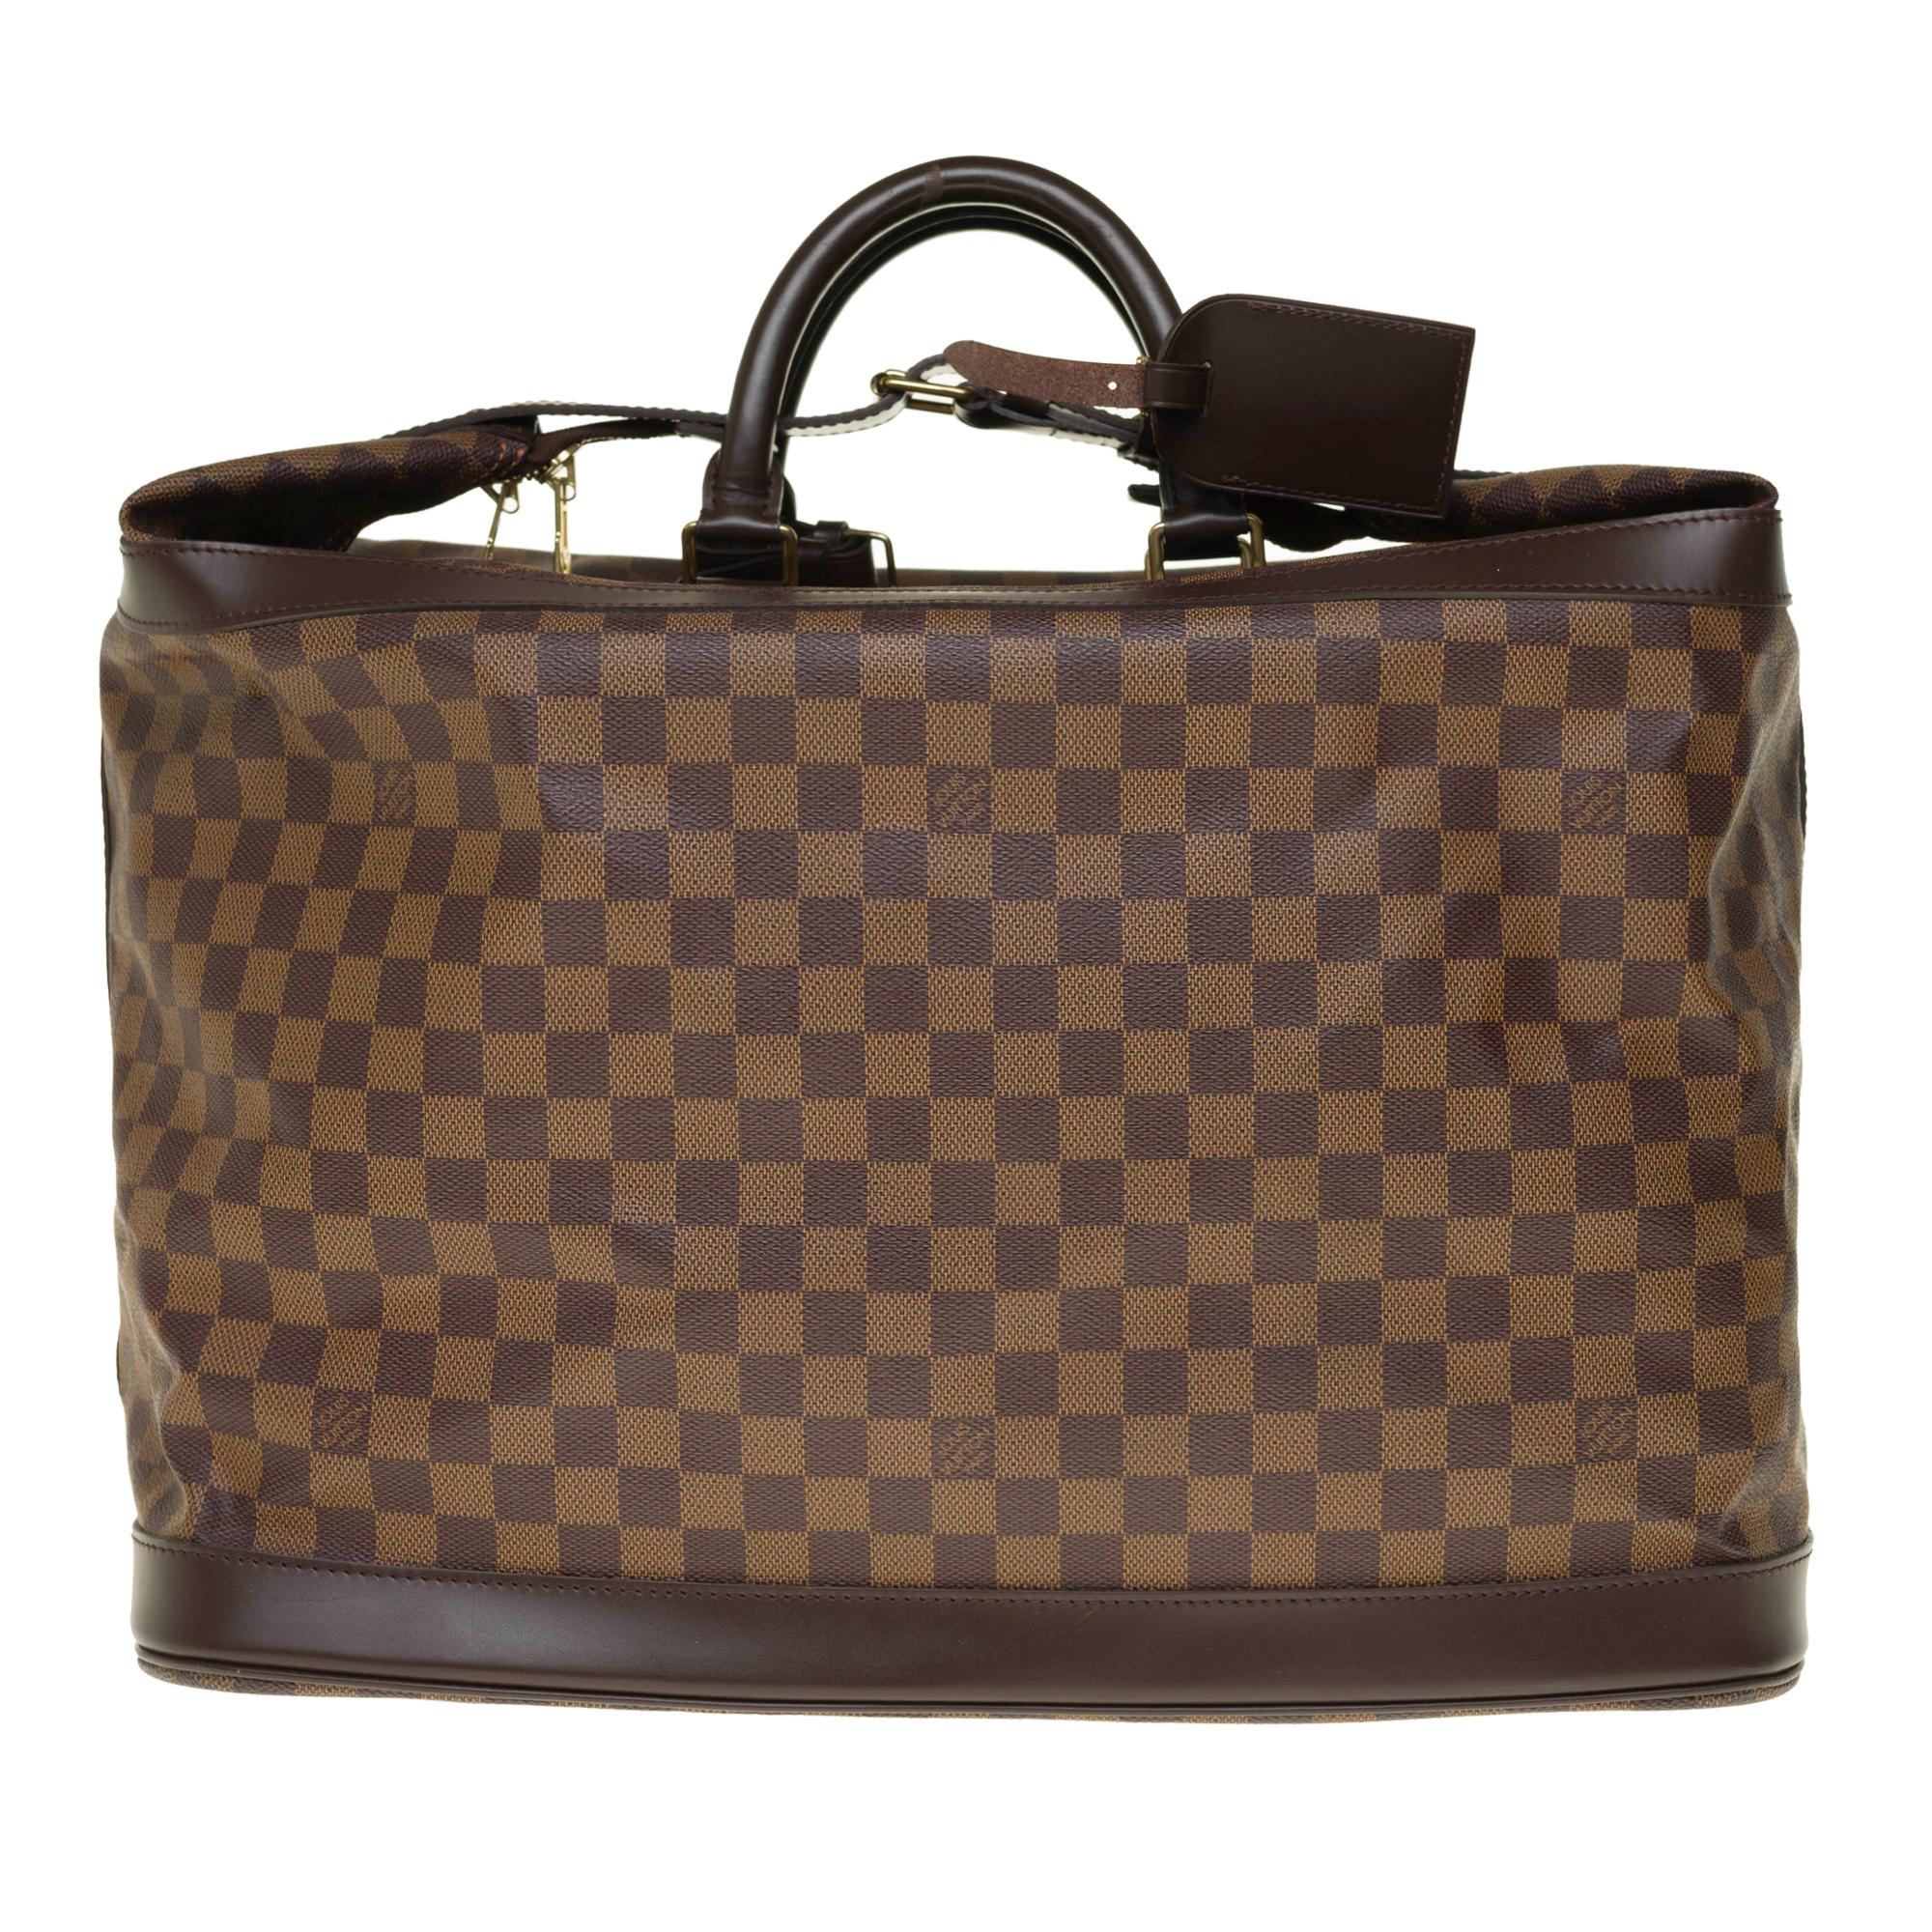 Beautiful Louis Vuitton Cruiser bag in ebony checkered canvas, gold metal trim.
Central zip fastening on top and leather strap.
Brown leather handles, handle clips and brown leather label holder.
Interior in red canvas.
5 feet of metal